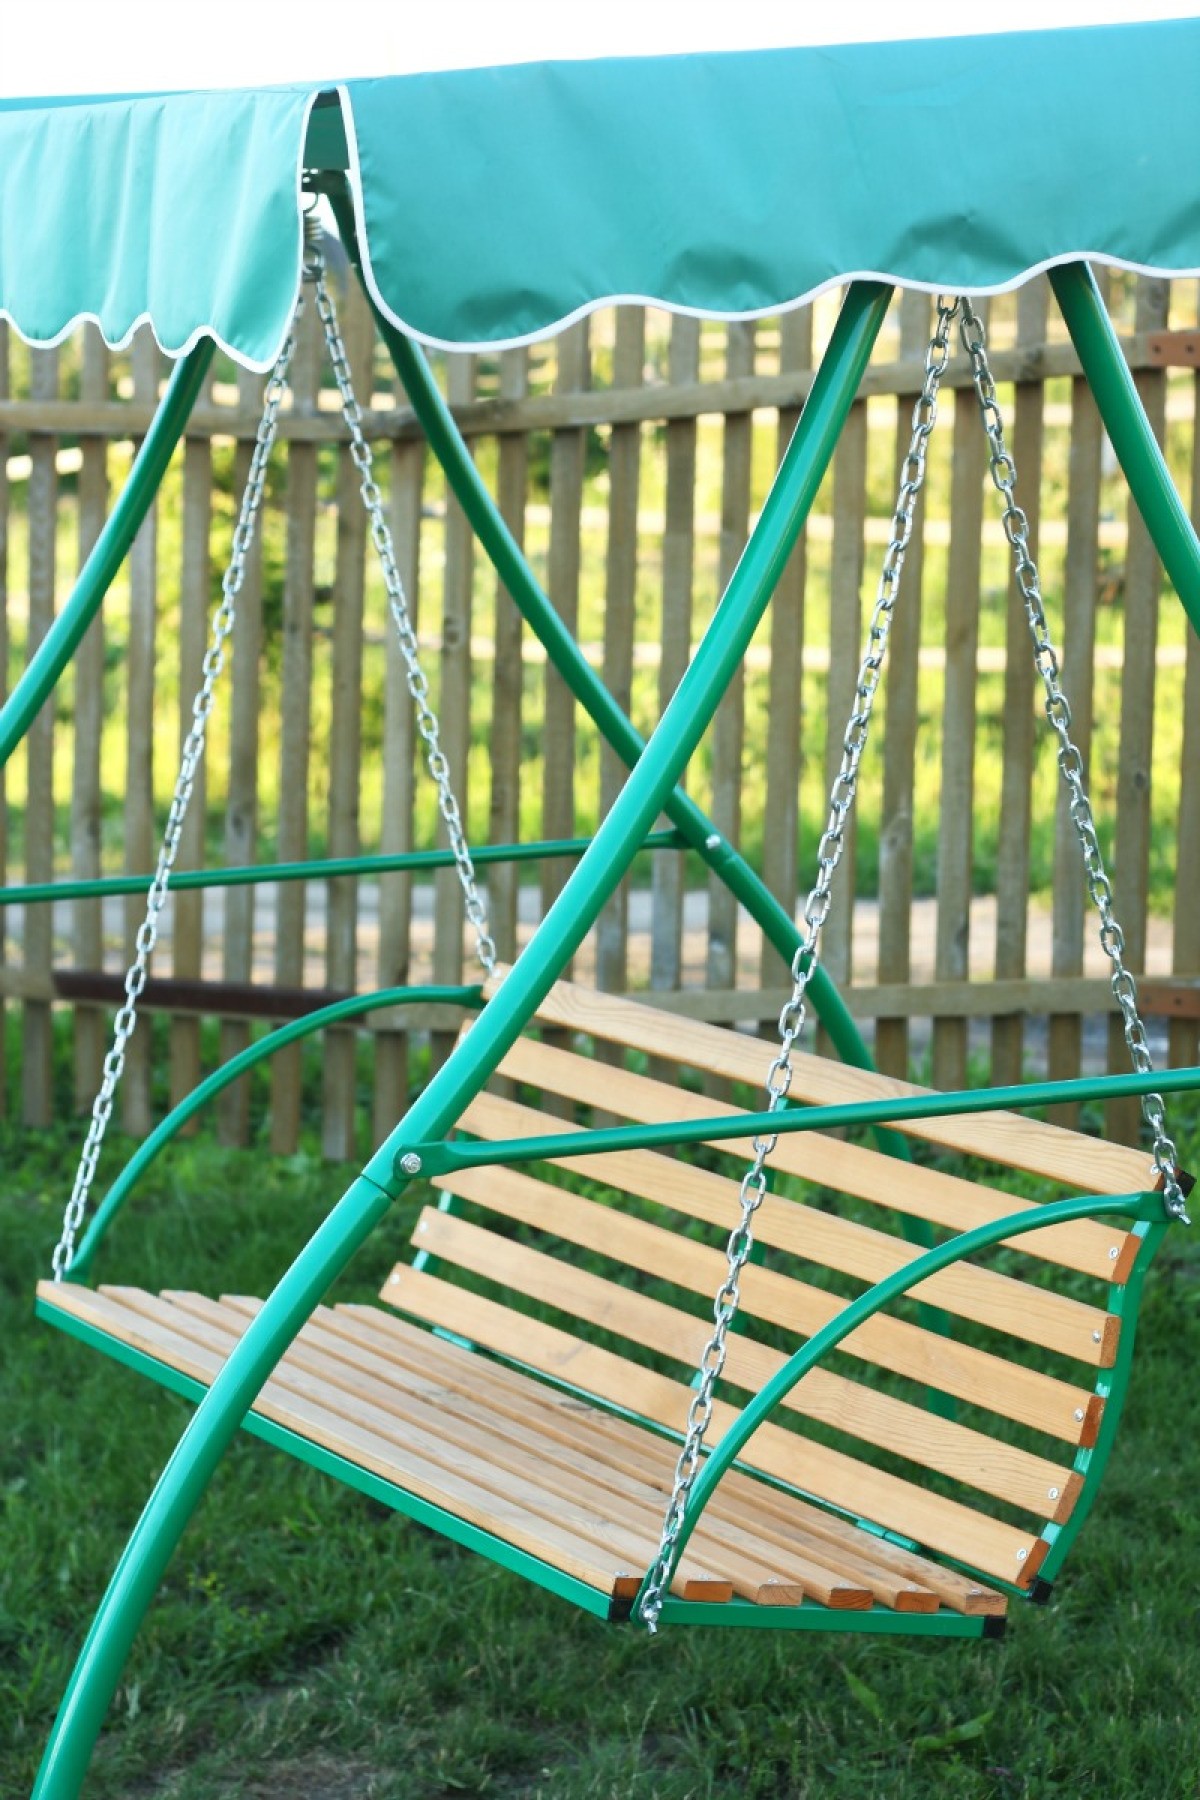 Replacing The Canopy On A Patio Swing, Replacement Material For Patio Swing